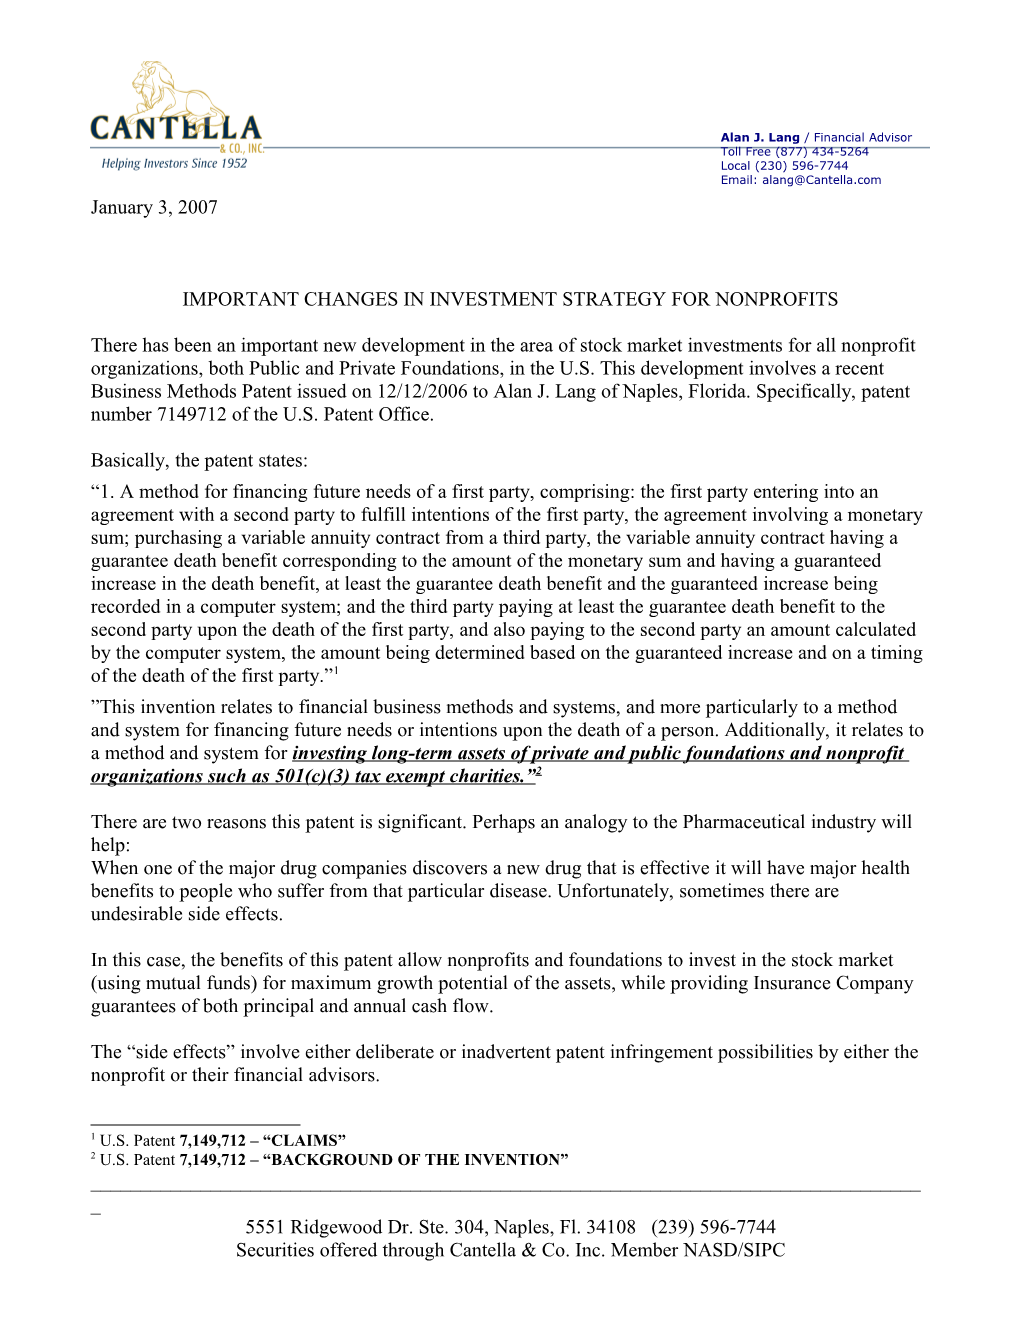 Letter from Alan Lang Warning Practitioners and Taxpayers About His CRT Patent - Jan. 3, 2007